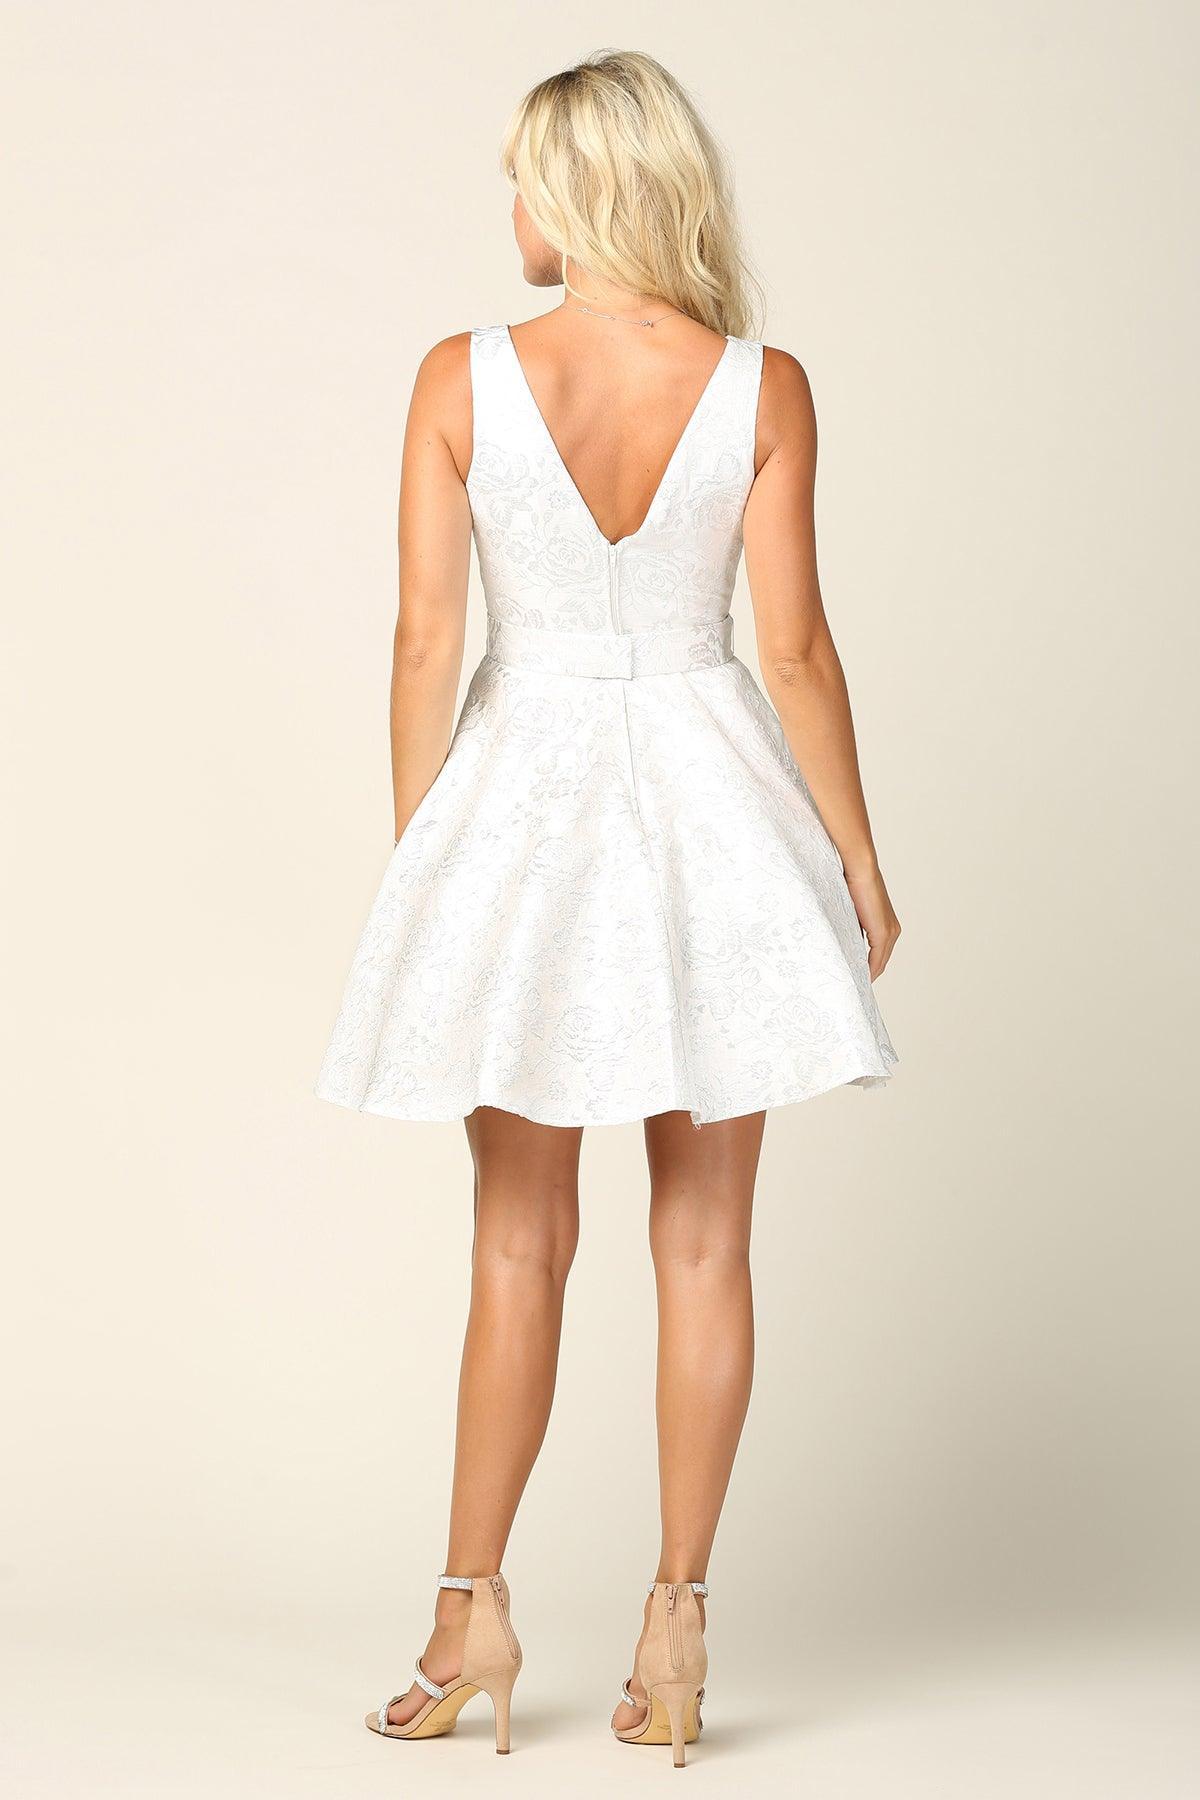 Short Sleeveless Homecoming Jacquard Cocktail Dress - The Dress Outlet